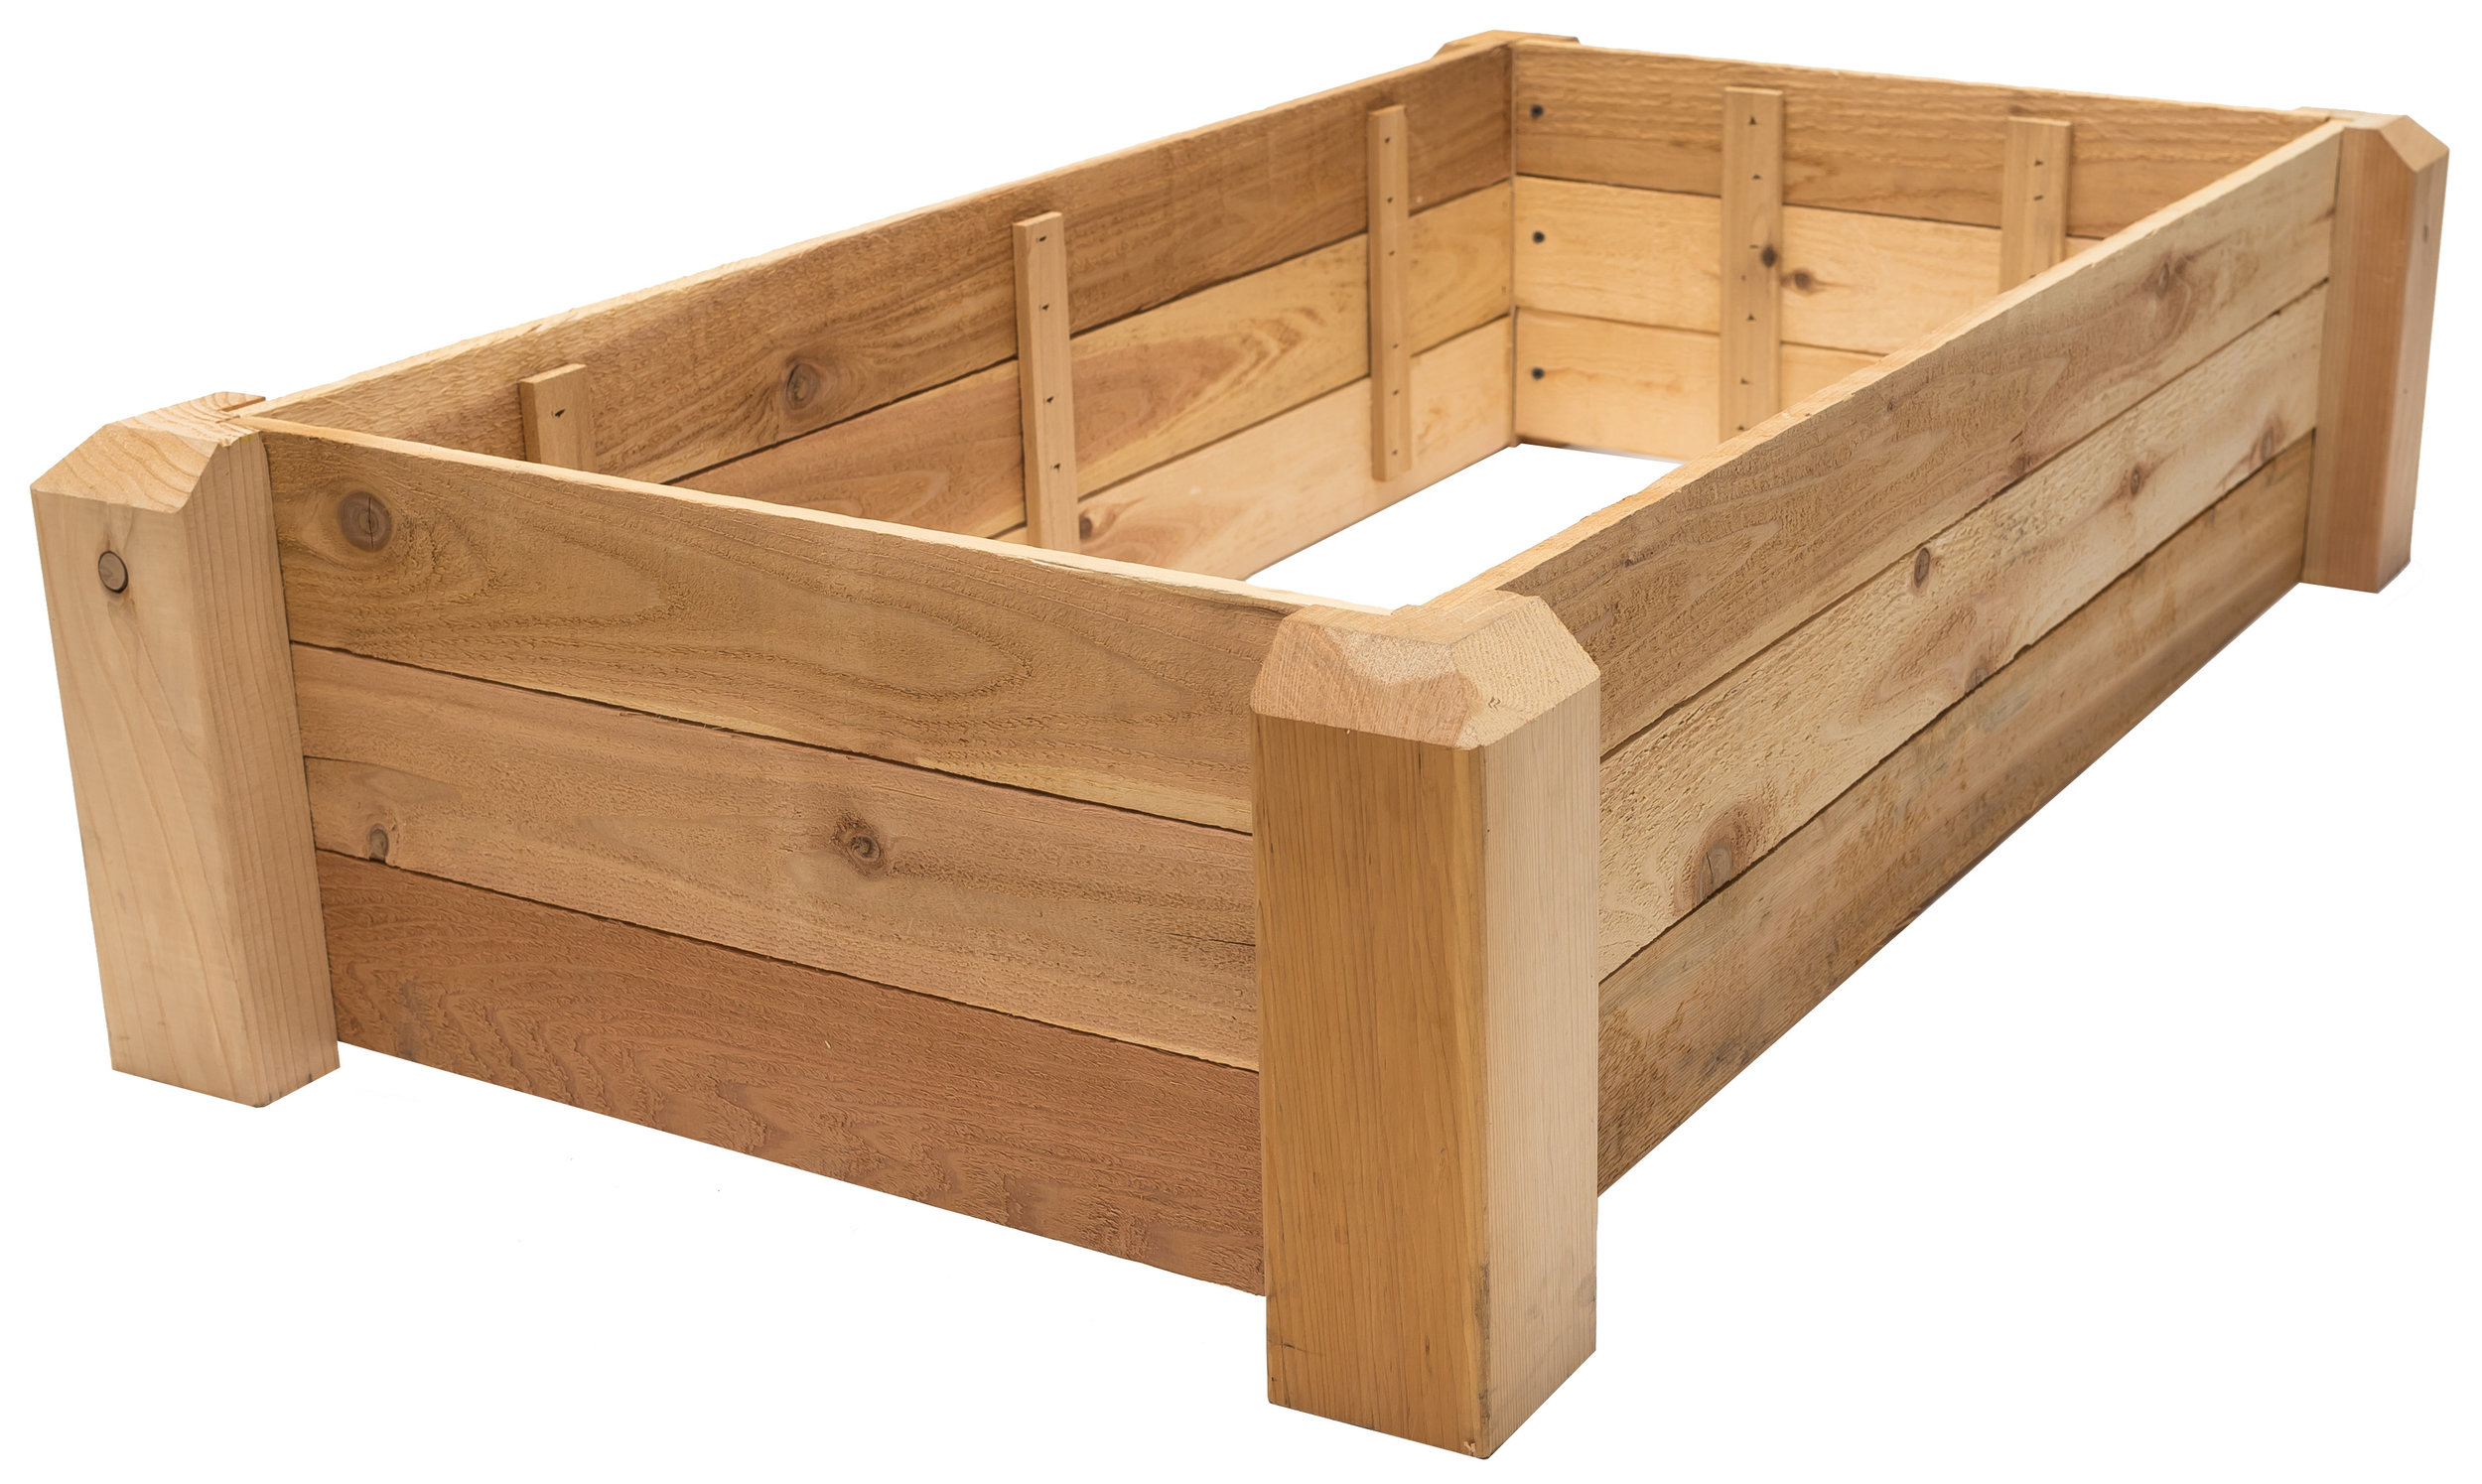  raised bed 2’x4’ height: 10.5” 